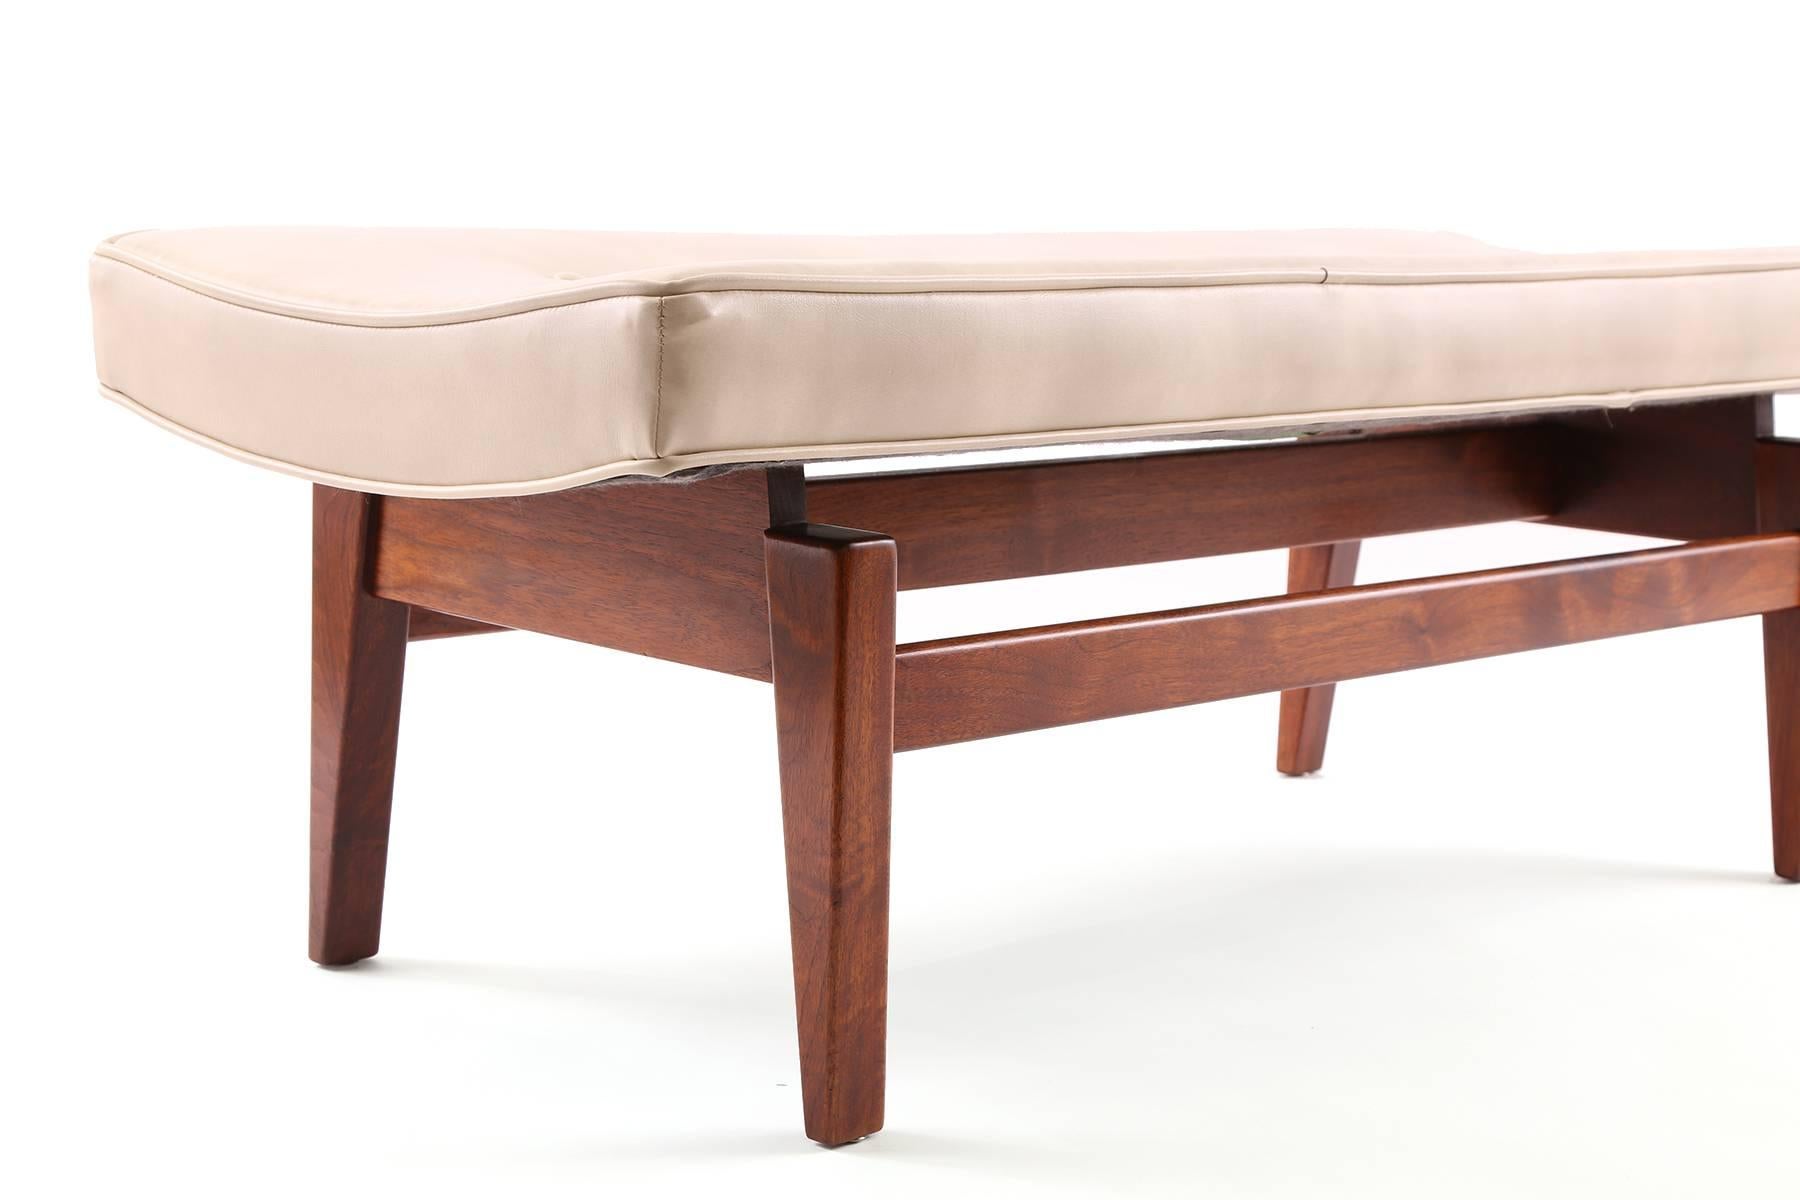 Jens Risom upholstered bench circa early 1960s. This all original example has a subtly curved cream vinyl top that sits atop a solid sculpted walnut base. 